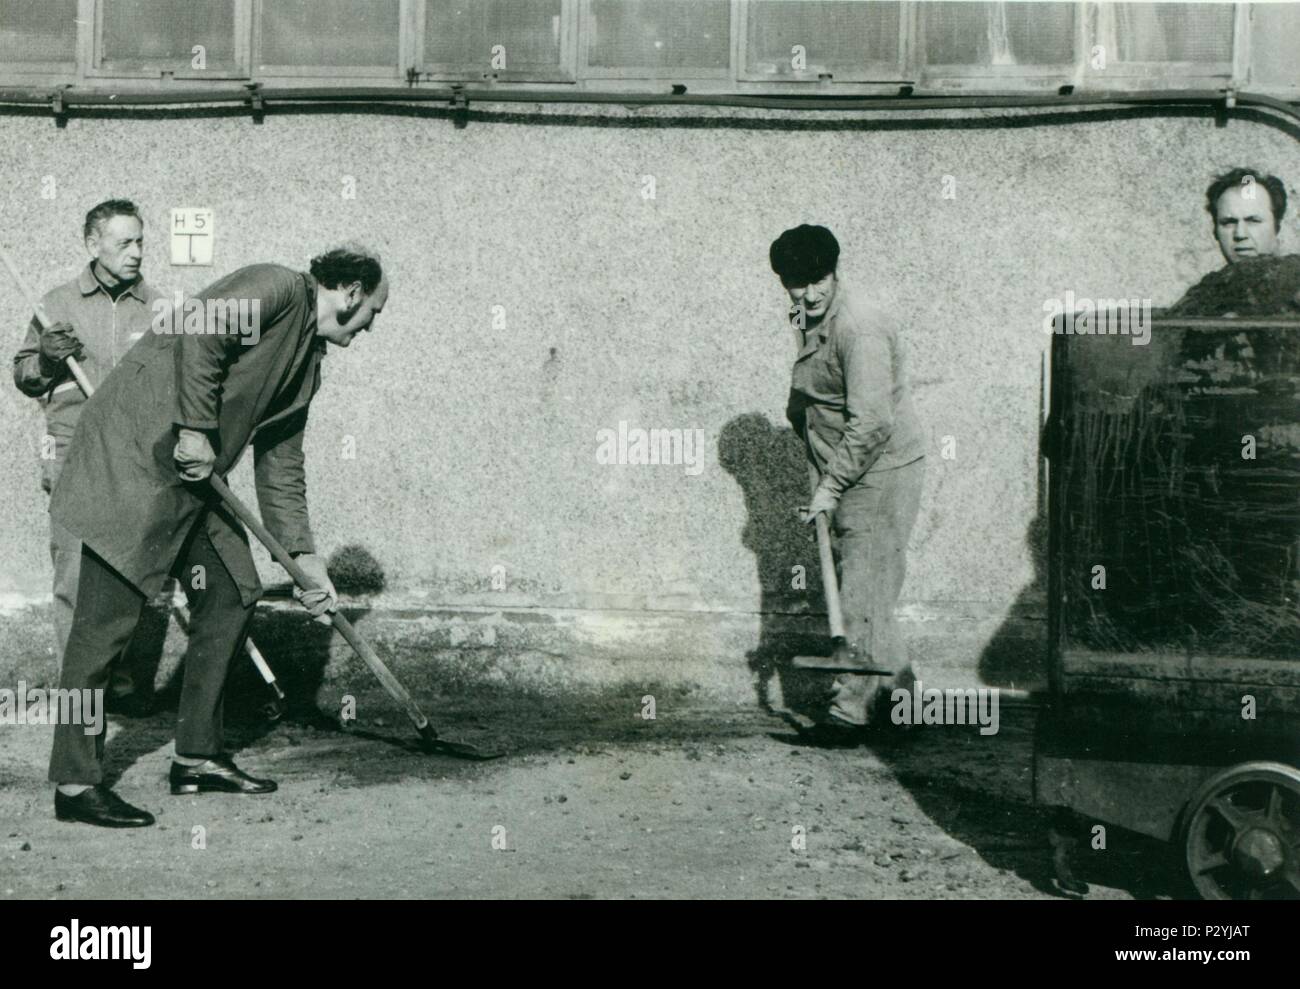 THE CZECHOSLOVAK  SOCIALIST REPUBLIC - CIRCA 1970s:  Retro photo shows workers cleaning the factory unit. Vintage  photography. Stock Photo